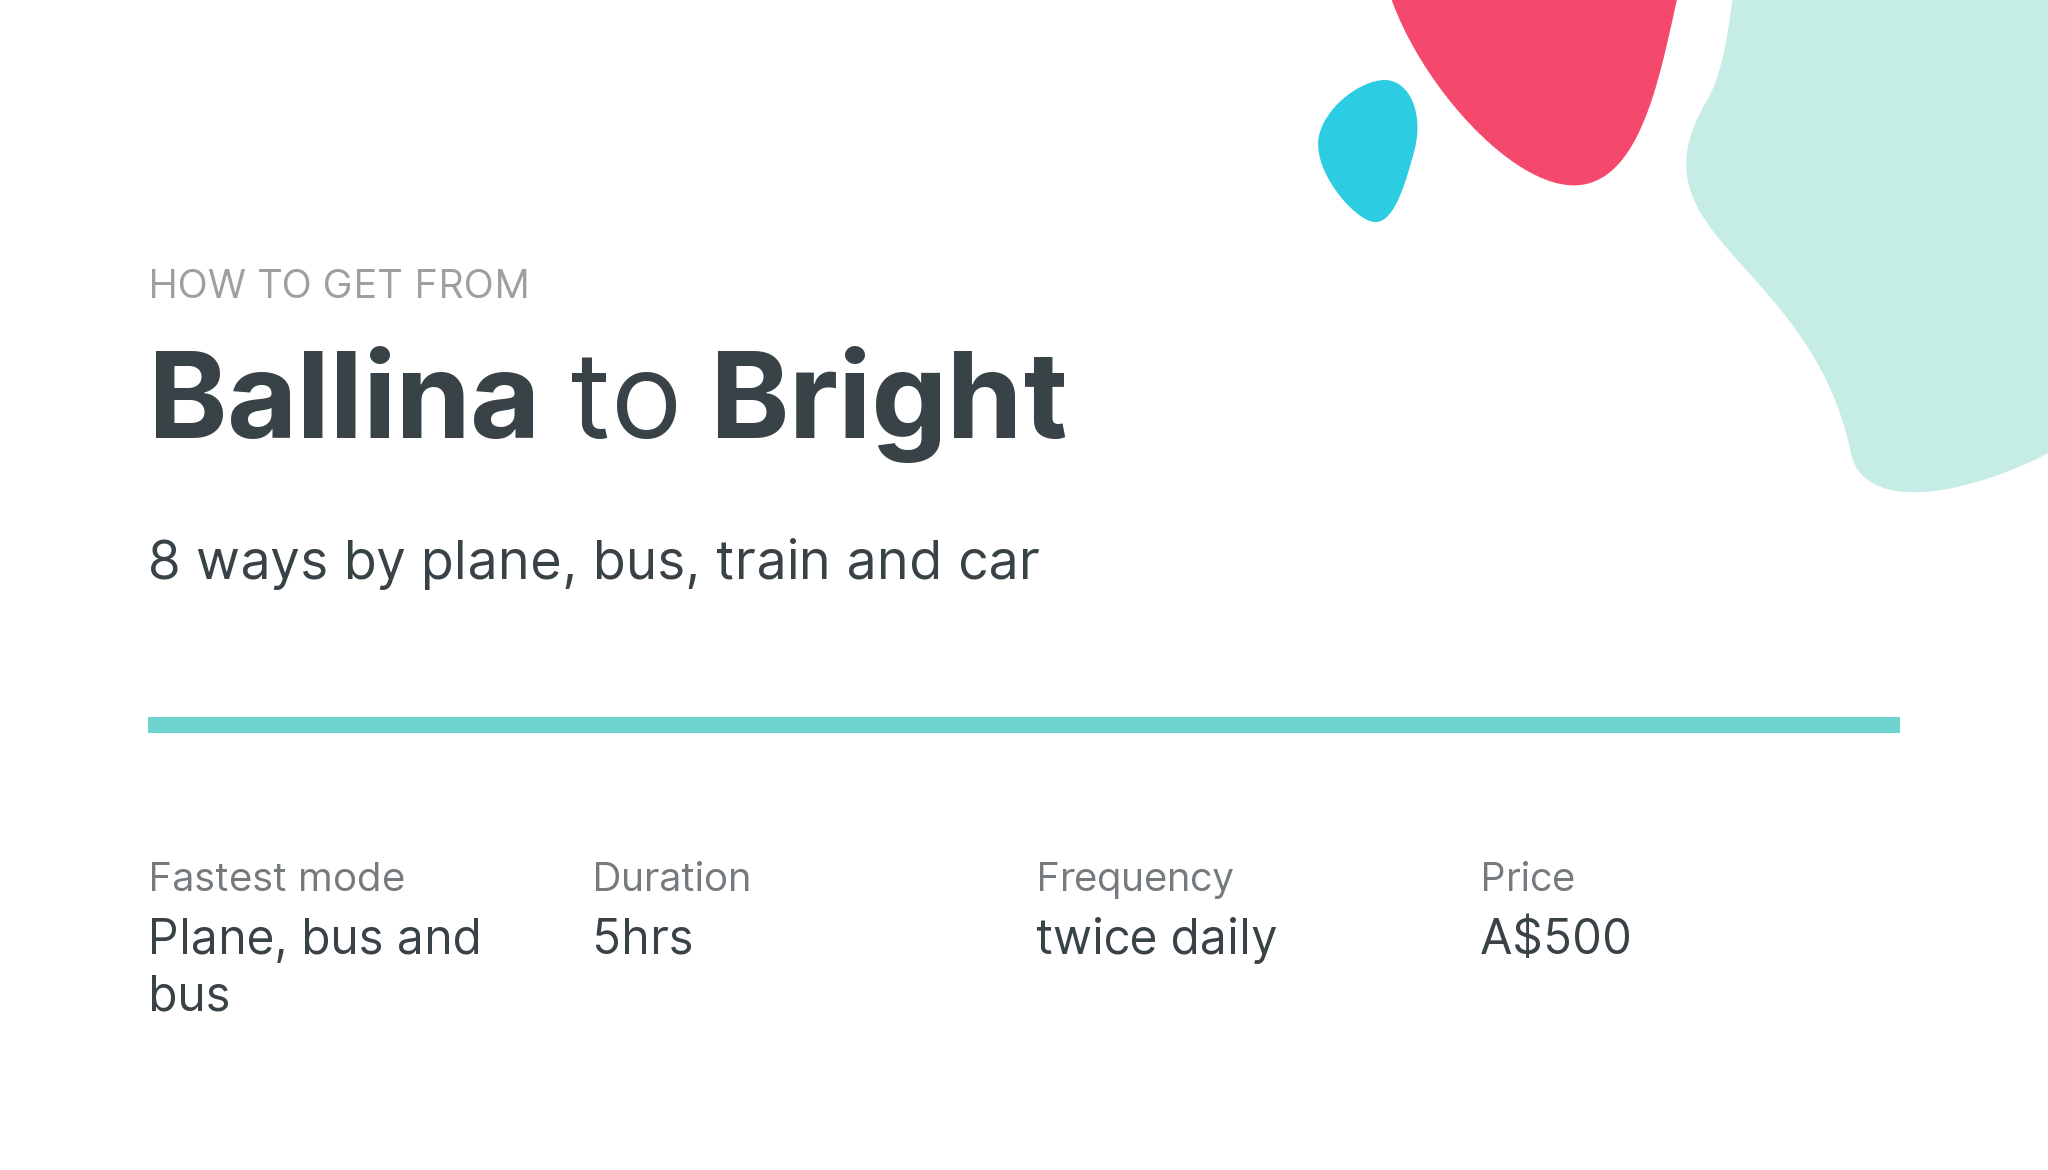 How do I get from Ballina to Bright